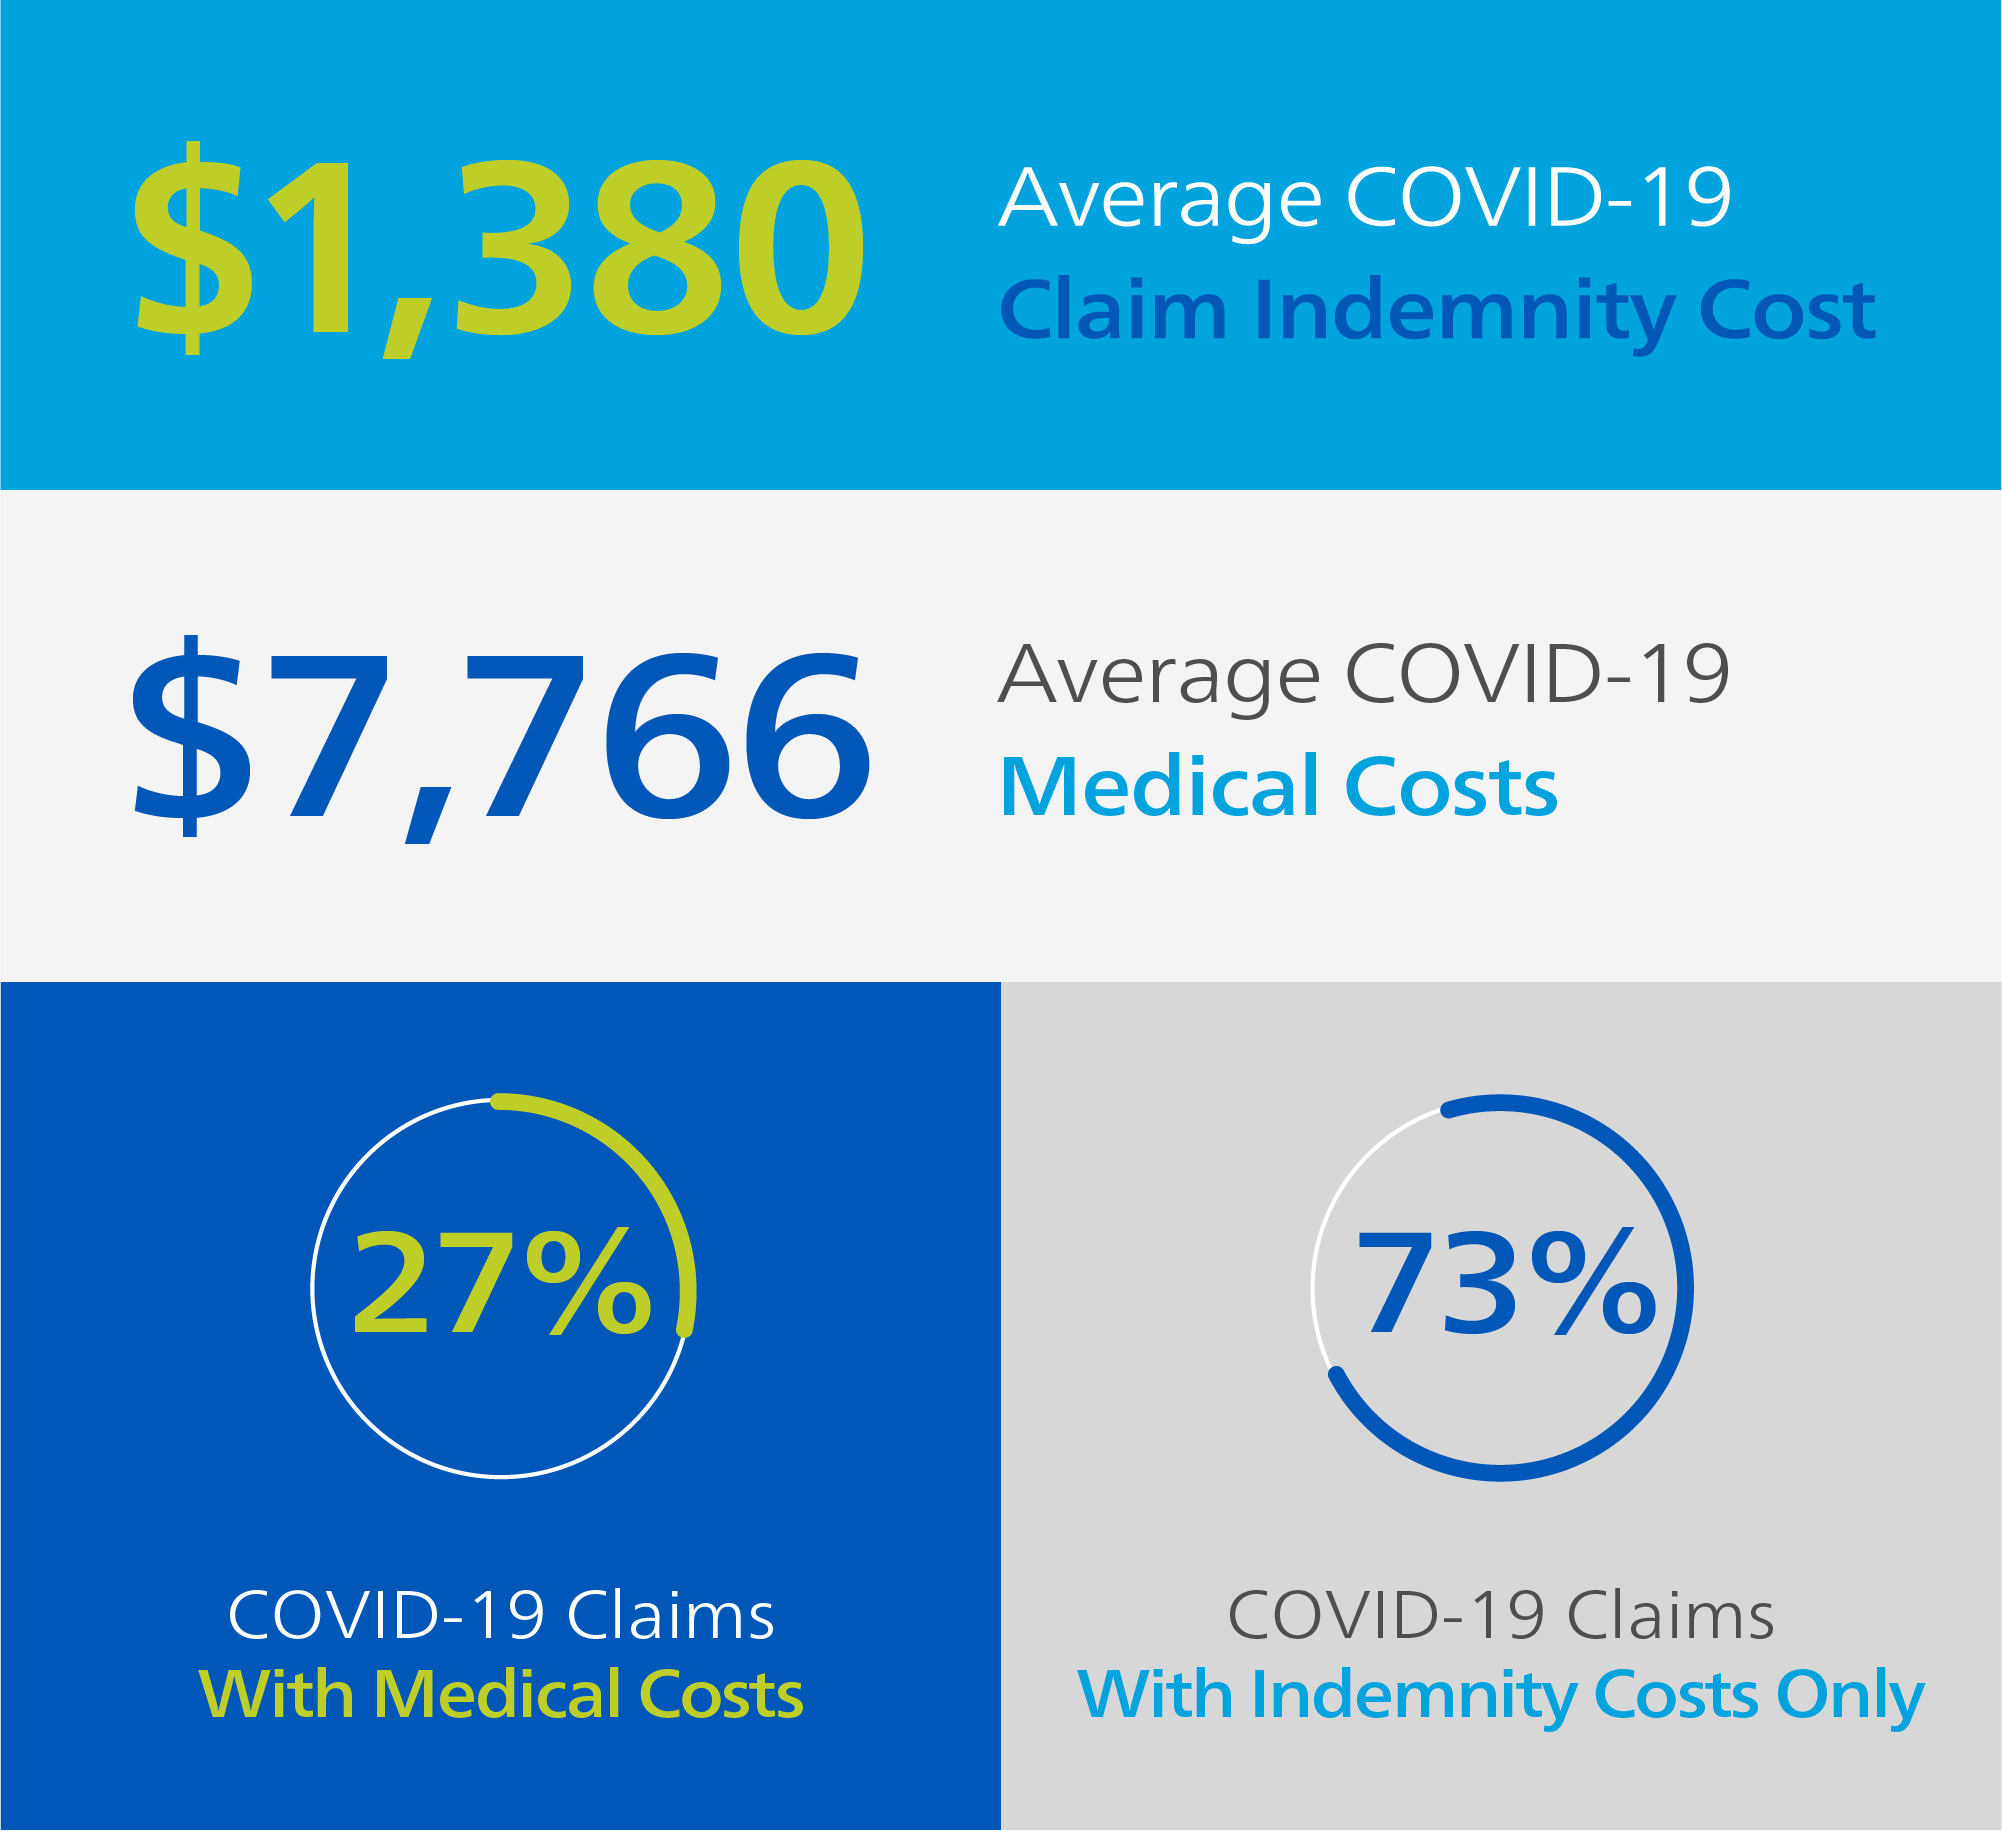 Costs Related to COVID-19 Claims